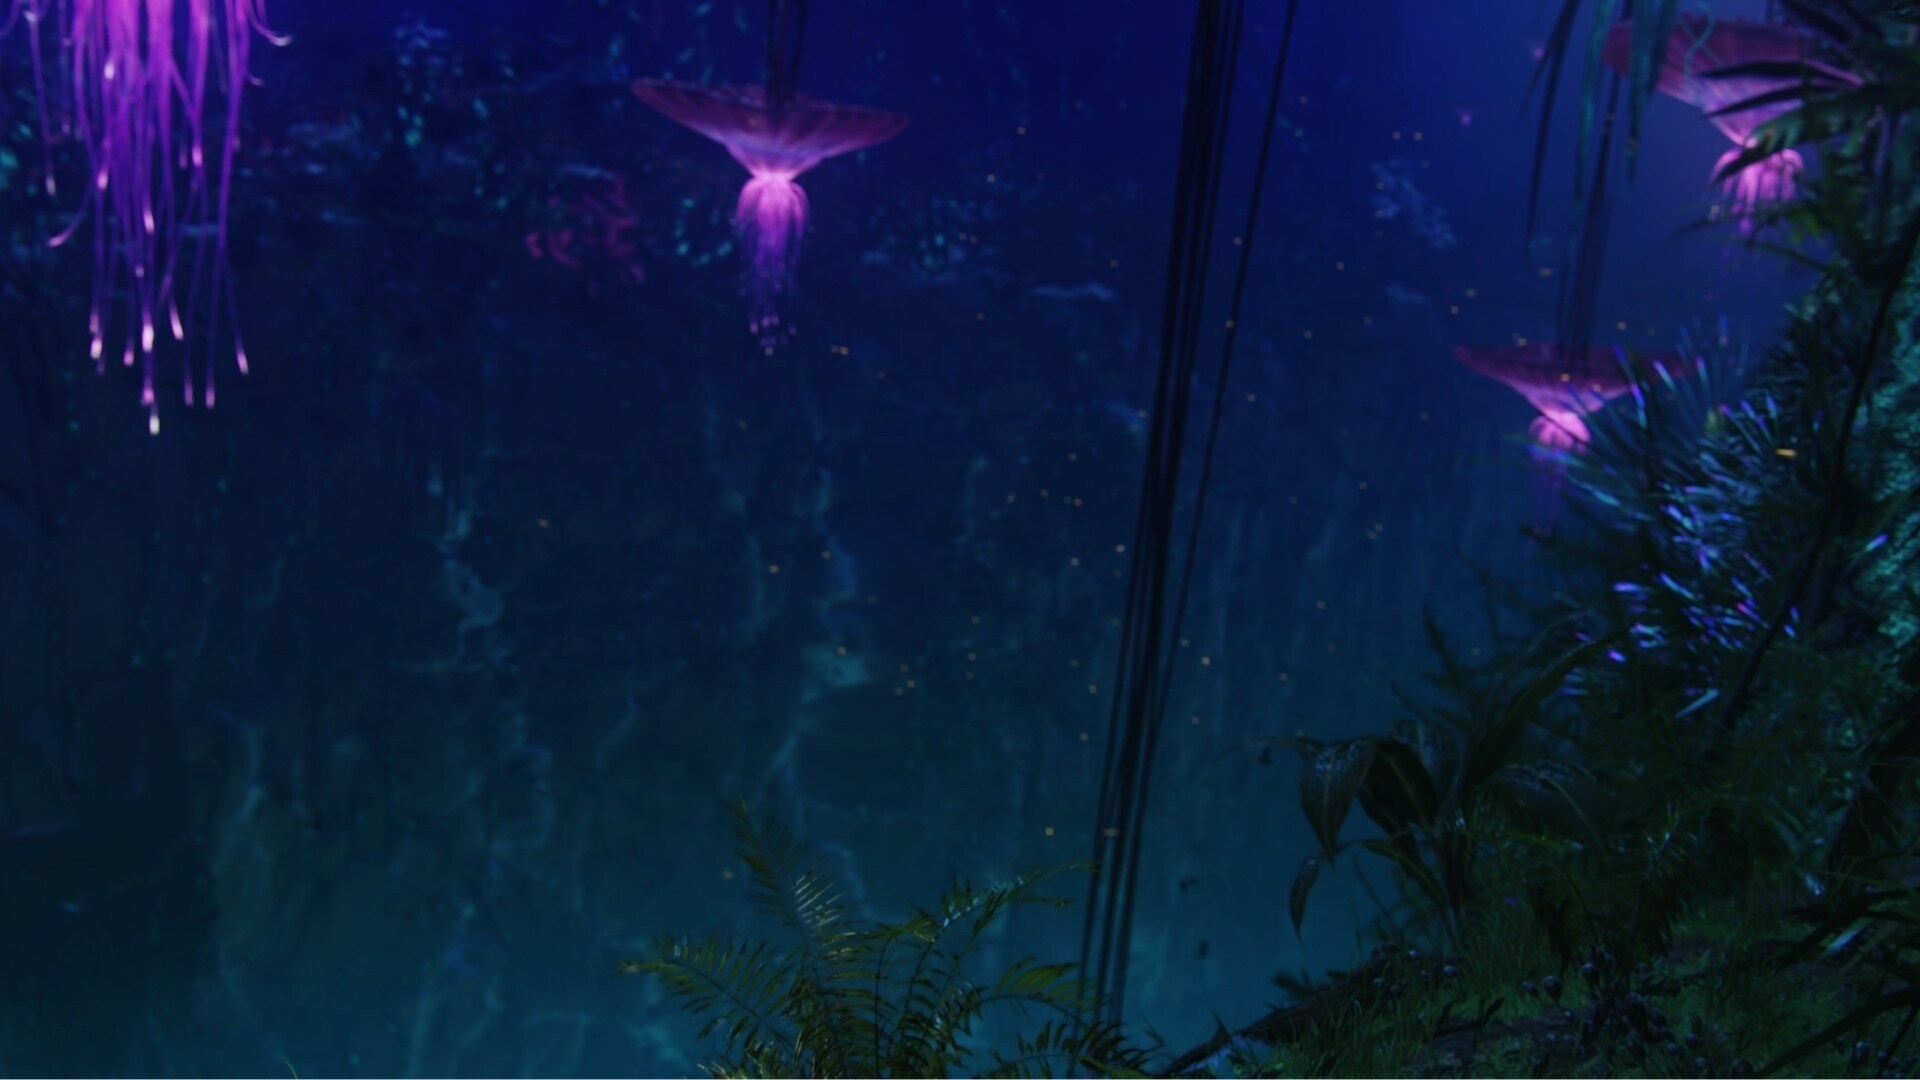 The Pandoran rainforest takes on a totally new look at night, with bioluminescence shining.